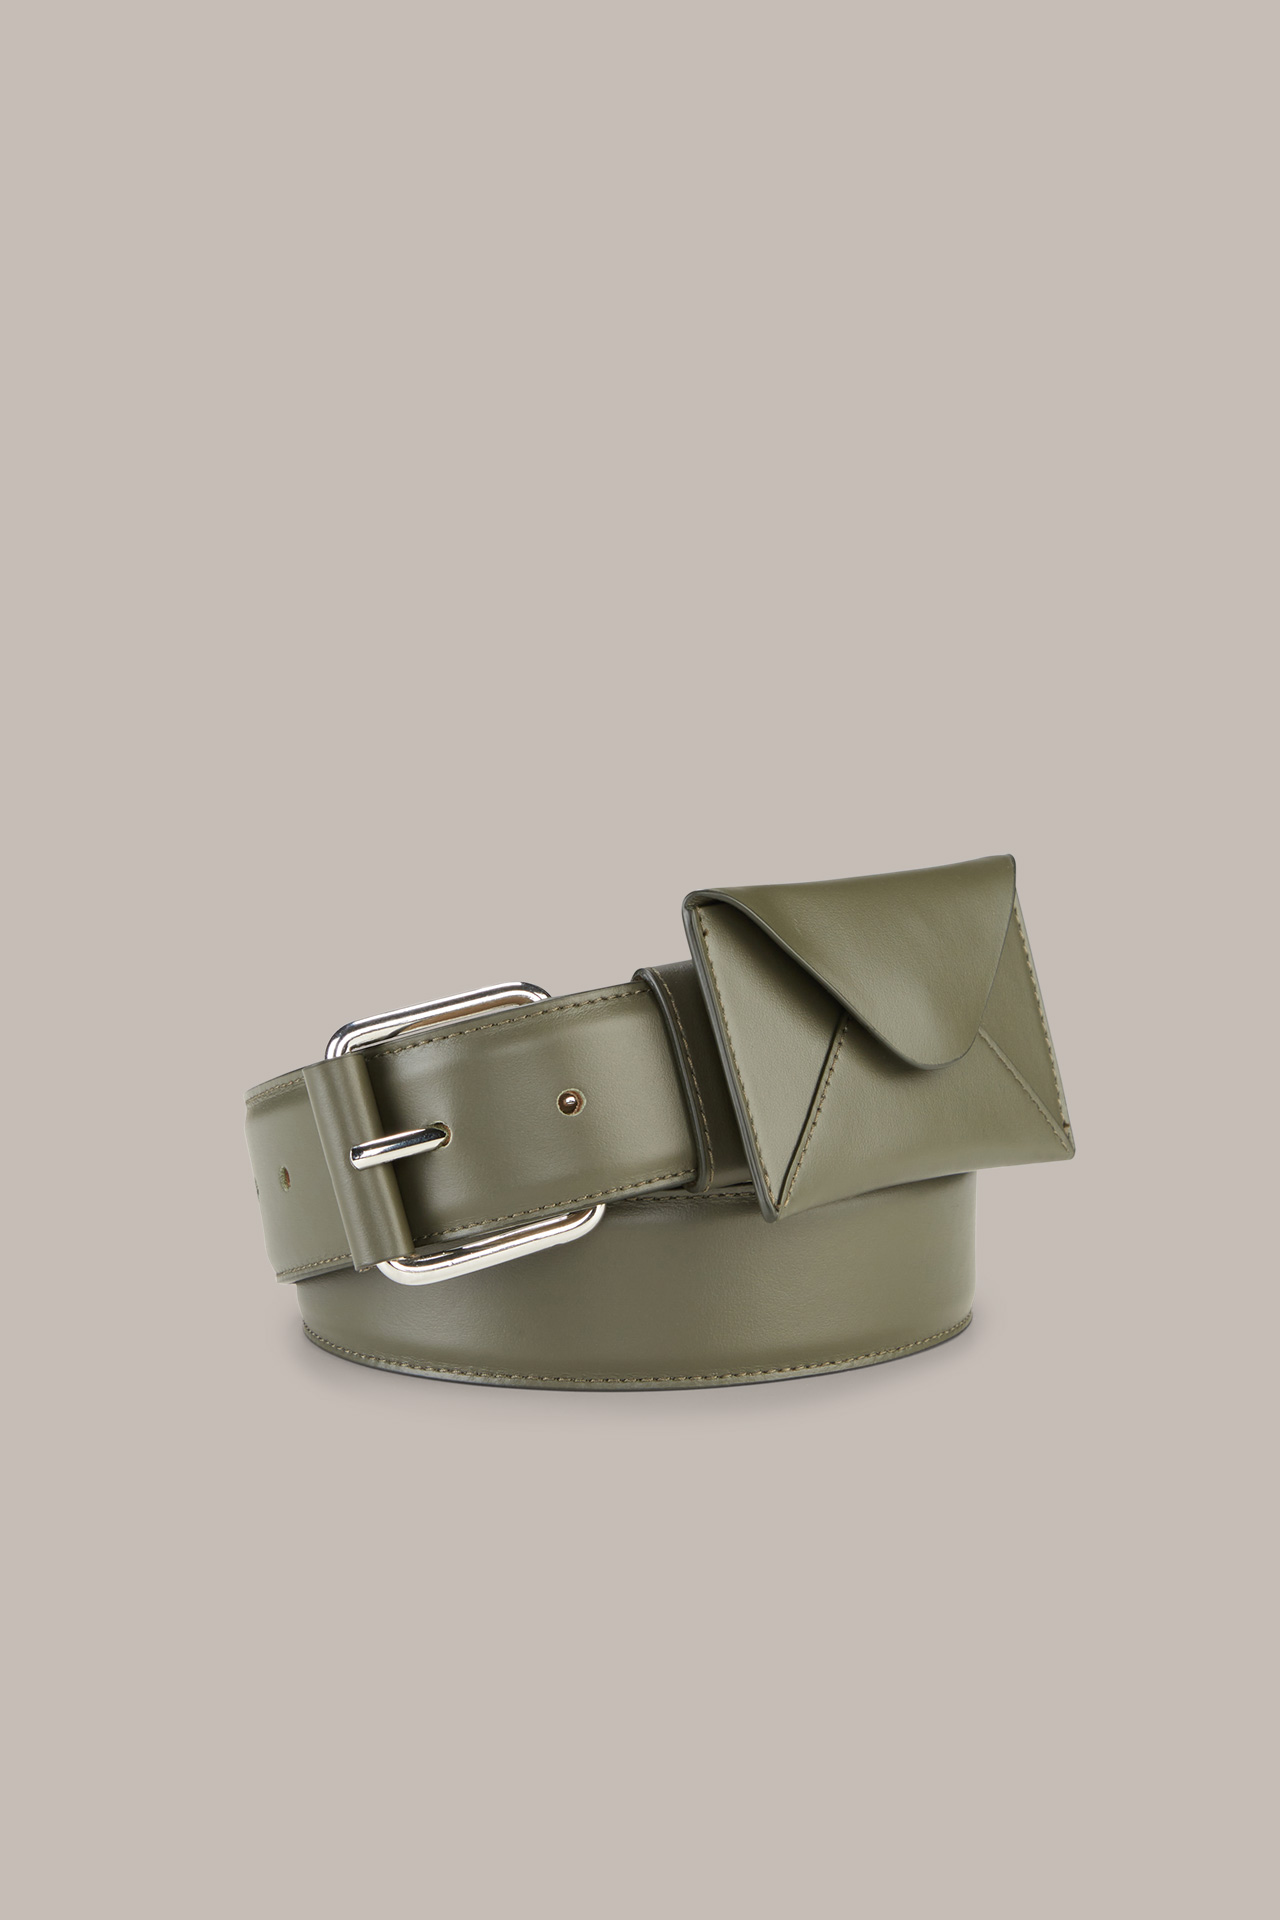 Nappa Leather Belt with detachable Envelope Bag in Olive